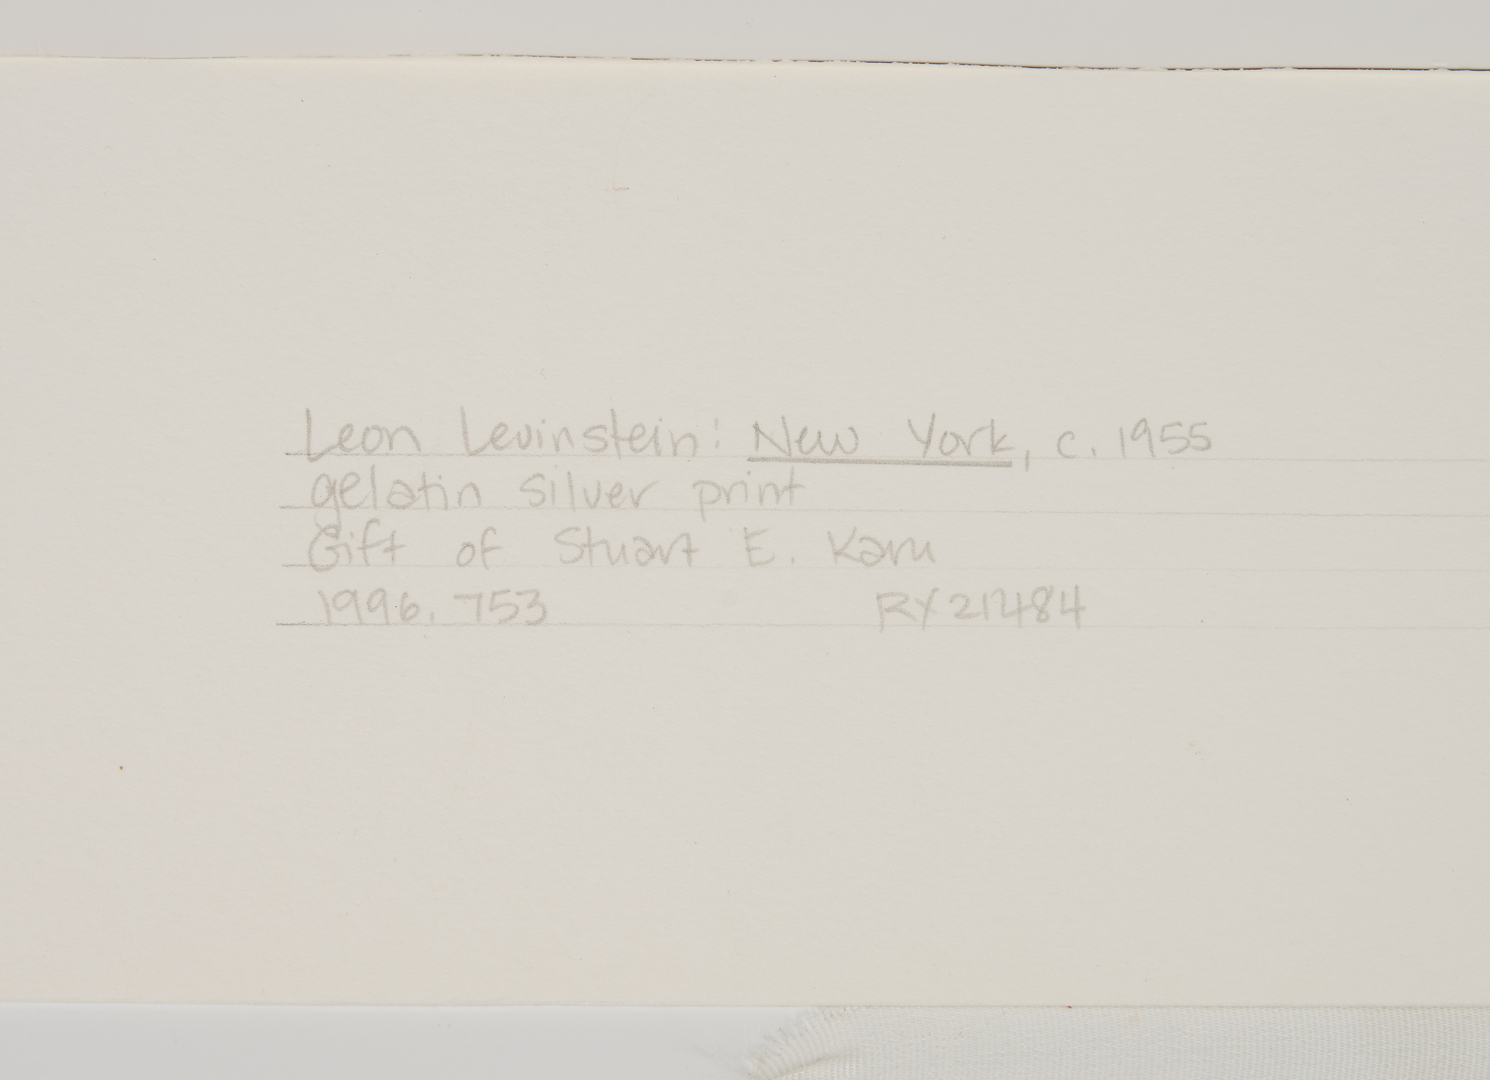 Lot 600: Leon Levinstein Photograph, Lower East Side